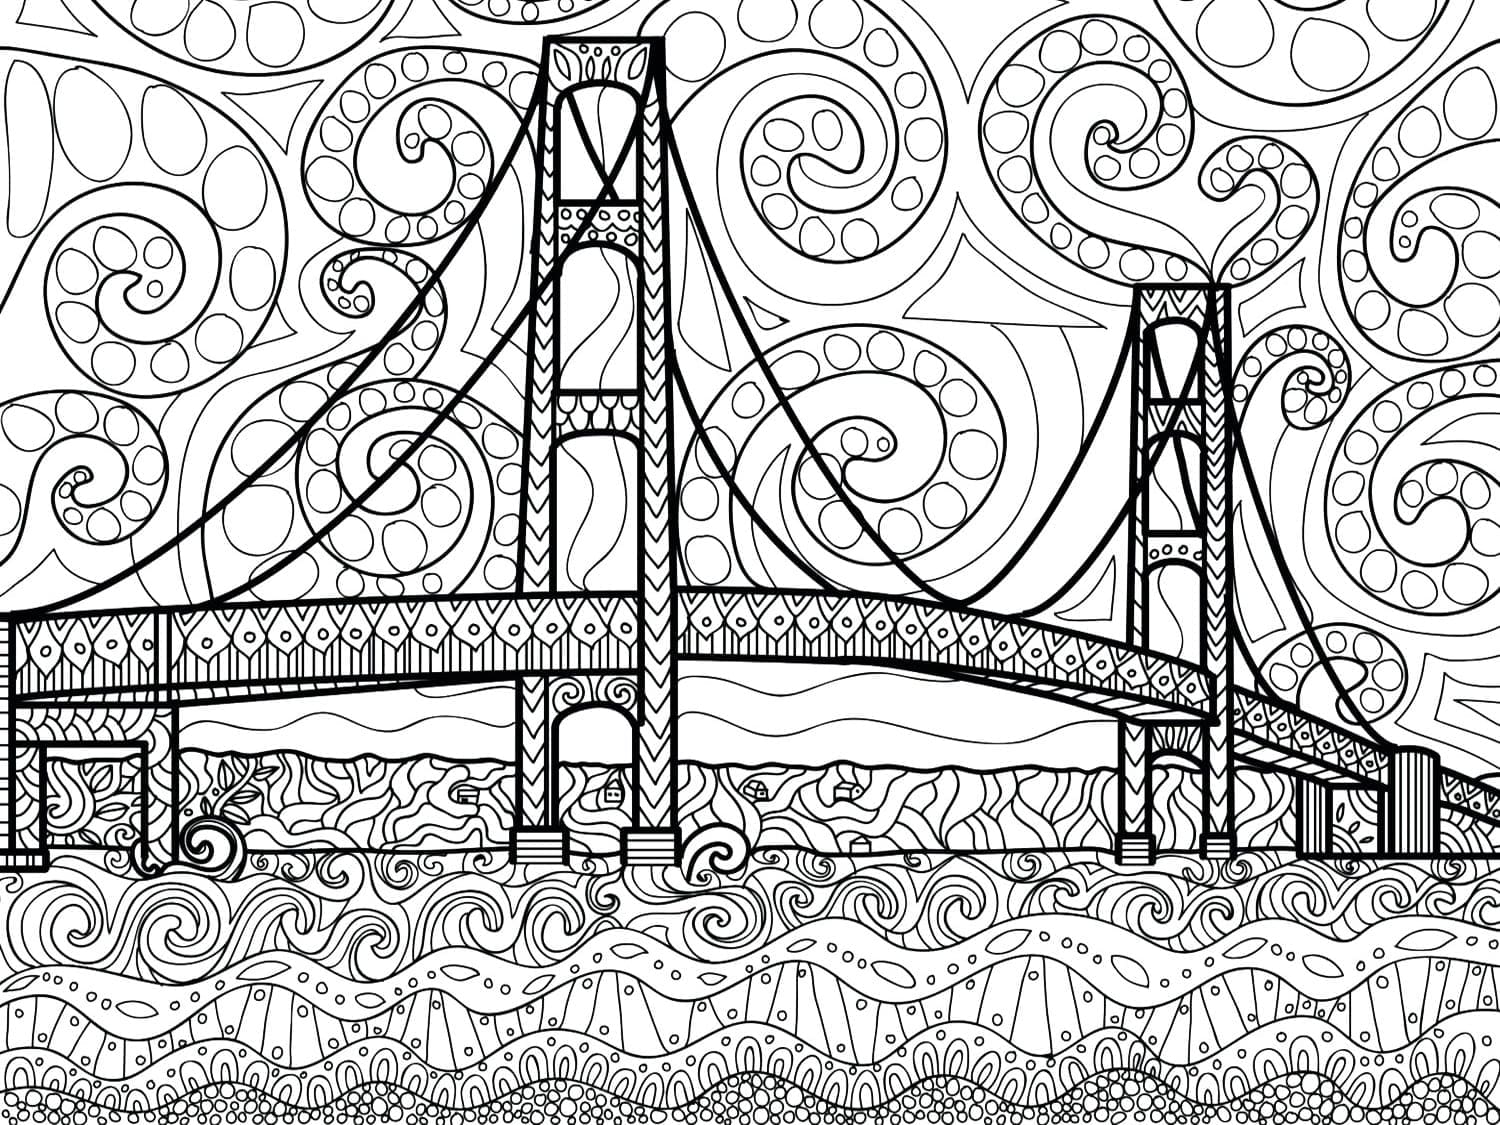 Pont Incroyable coloring page